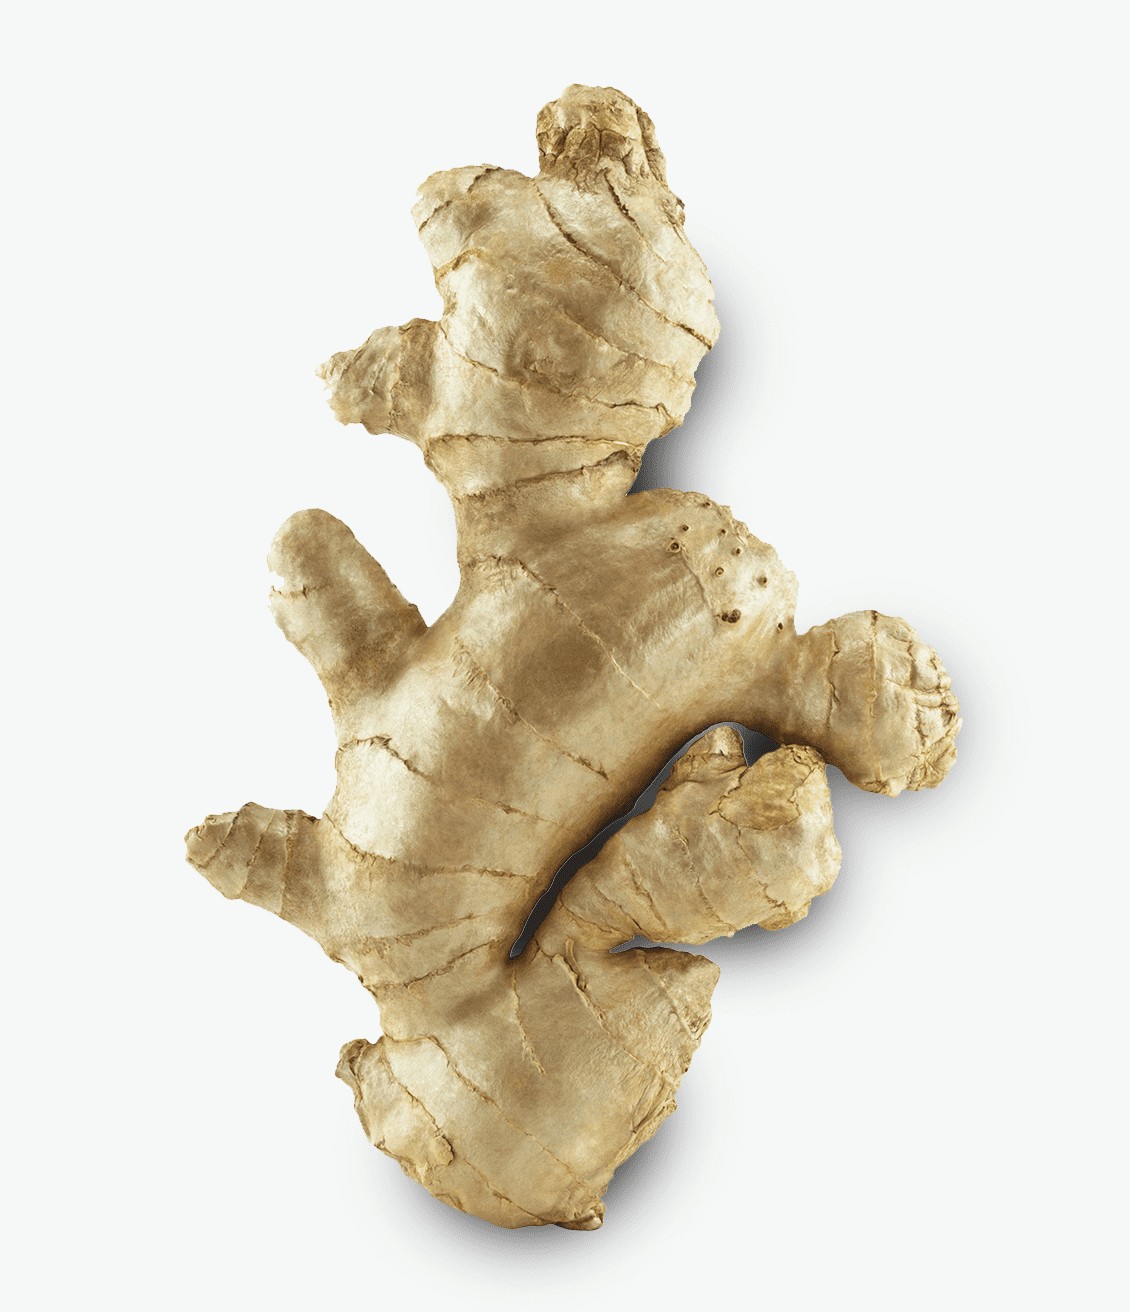 Ginger has a strong taste that mixes well with others plants in herbal teas